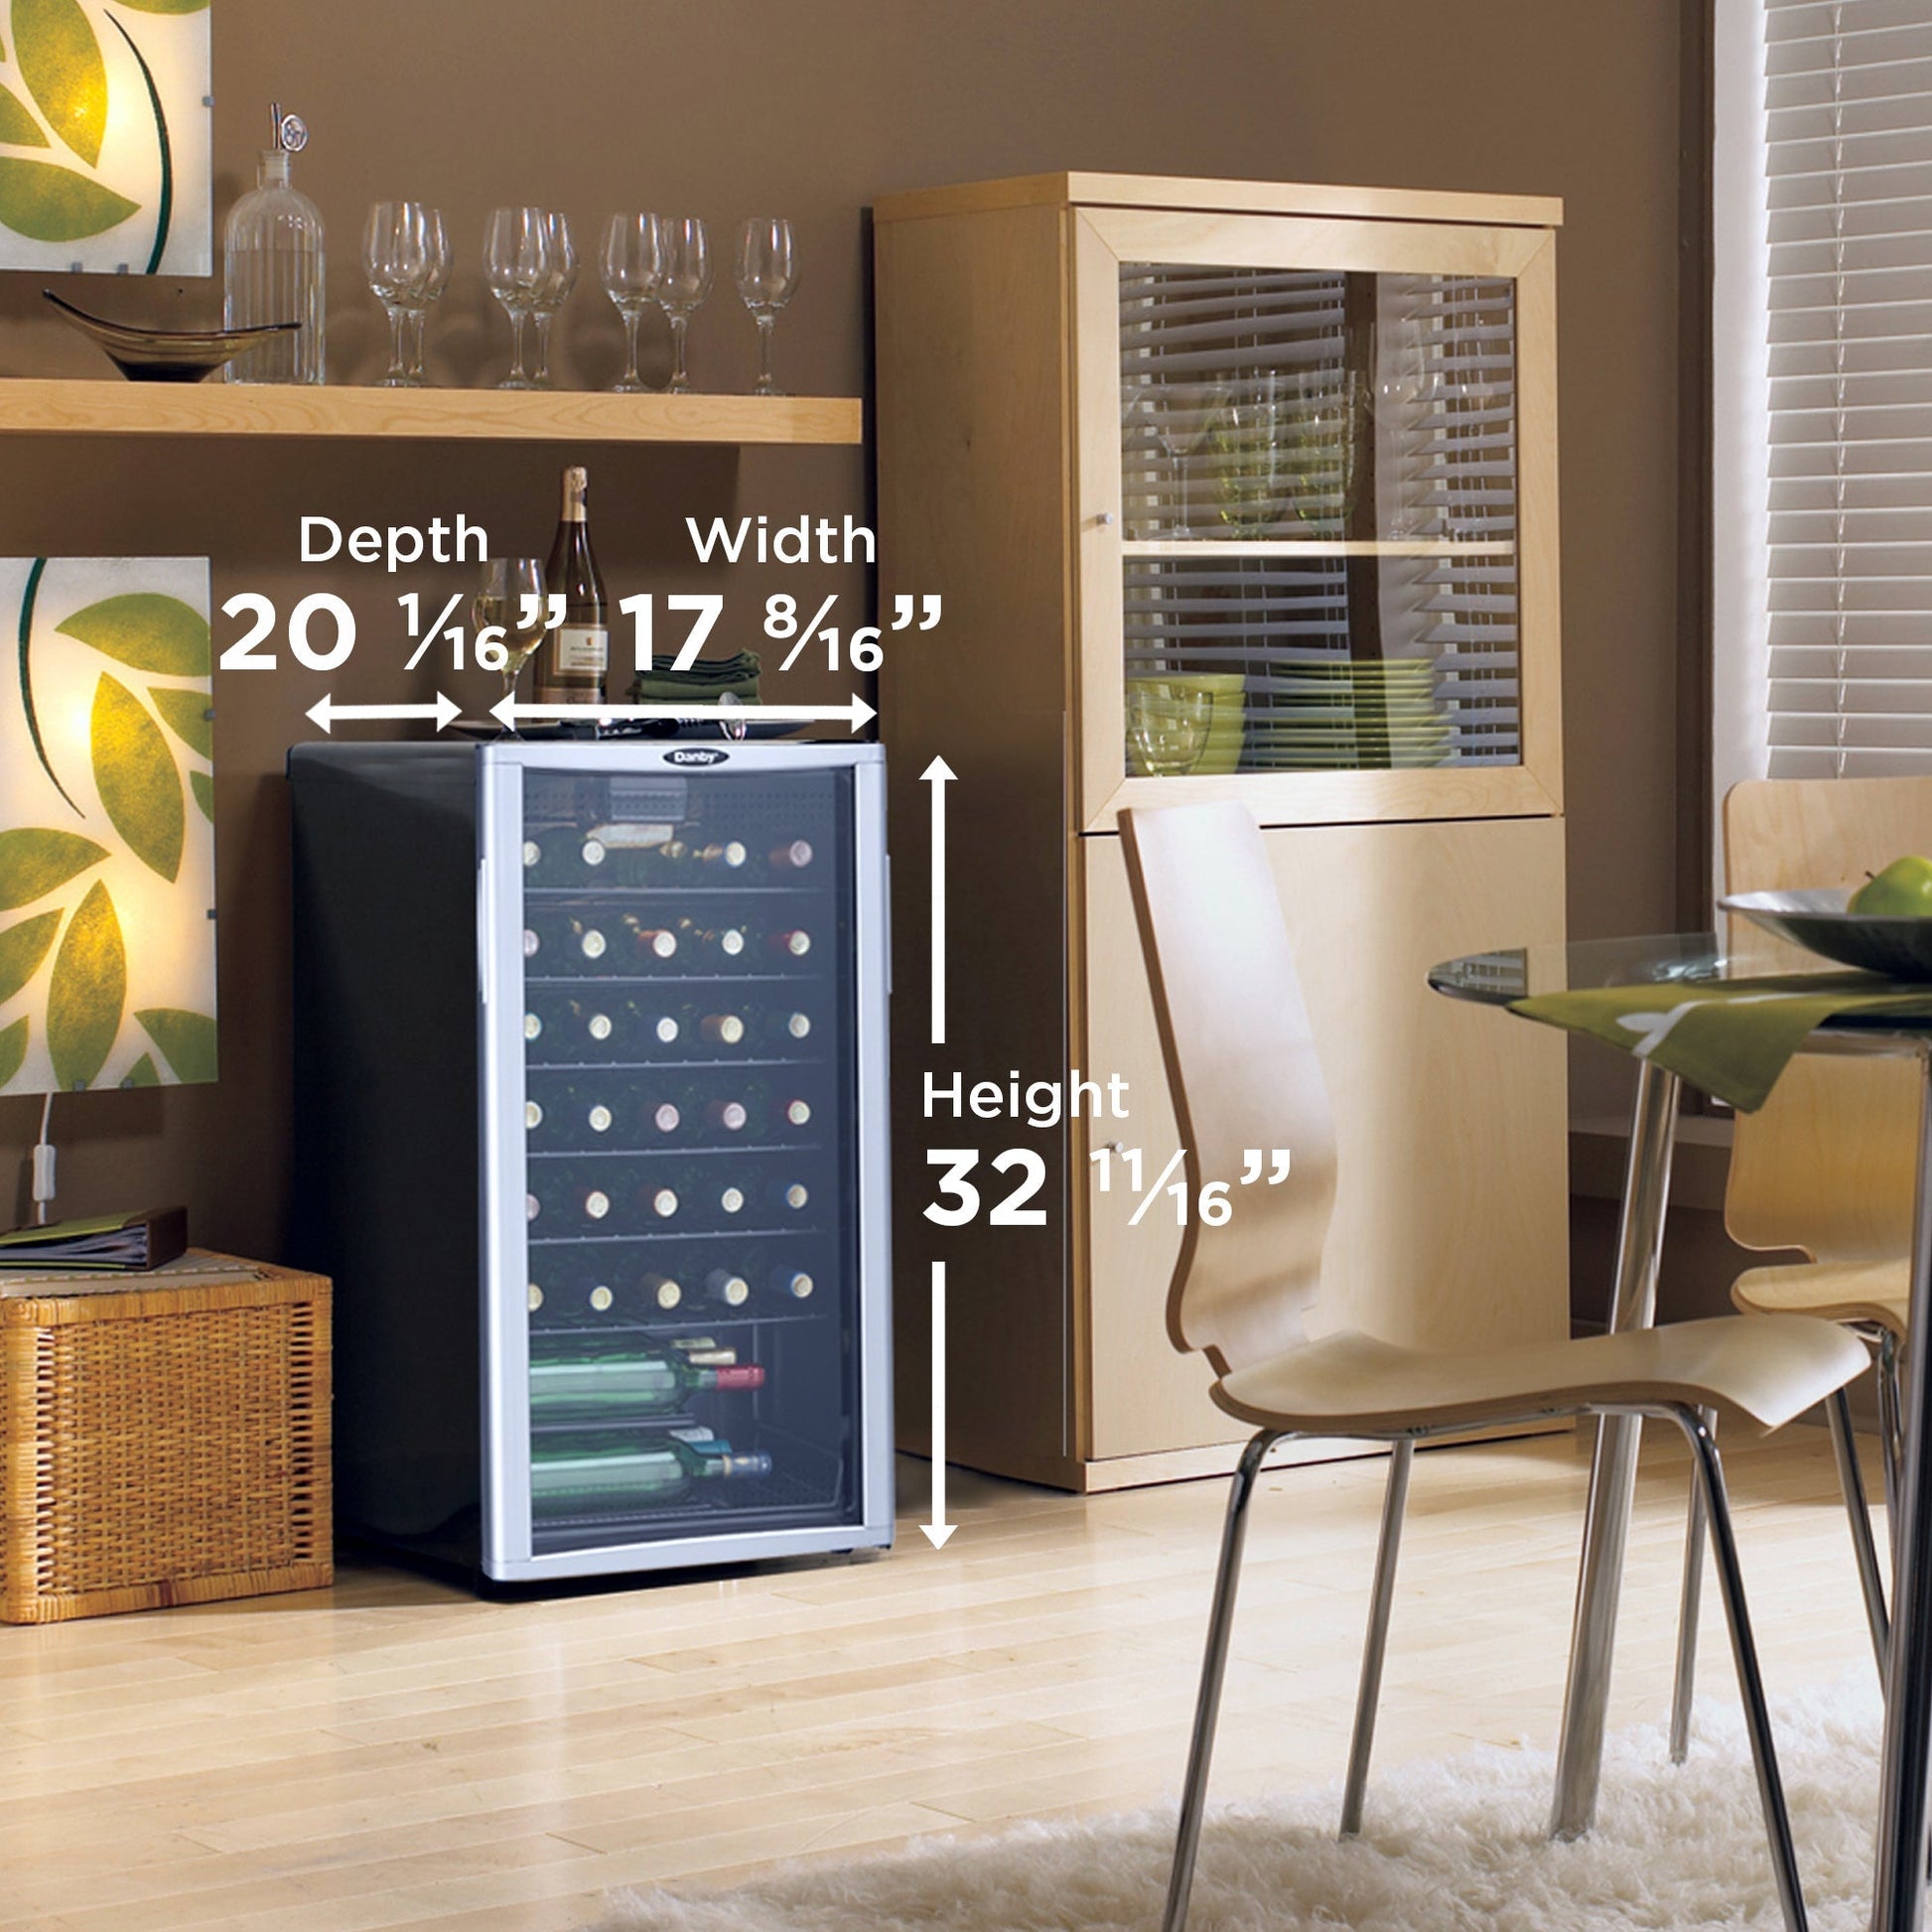 Danby 36 Bottle Free-Standing Wine Cooler in Stainless Steel